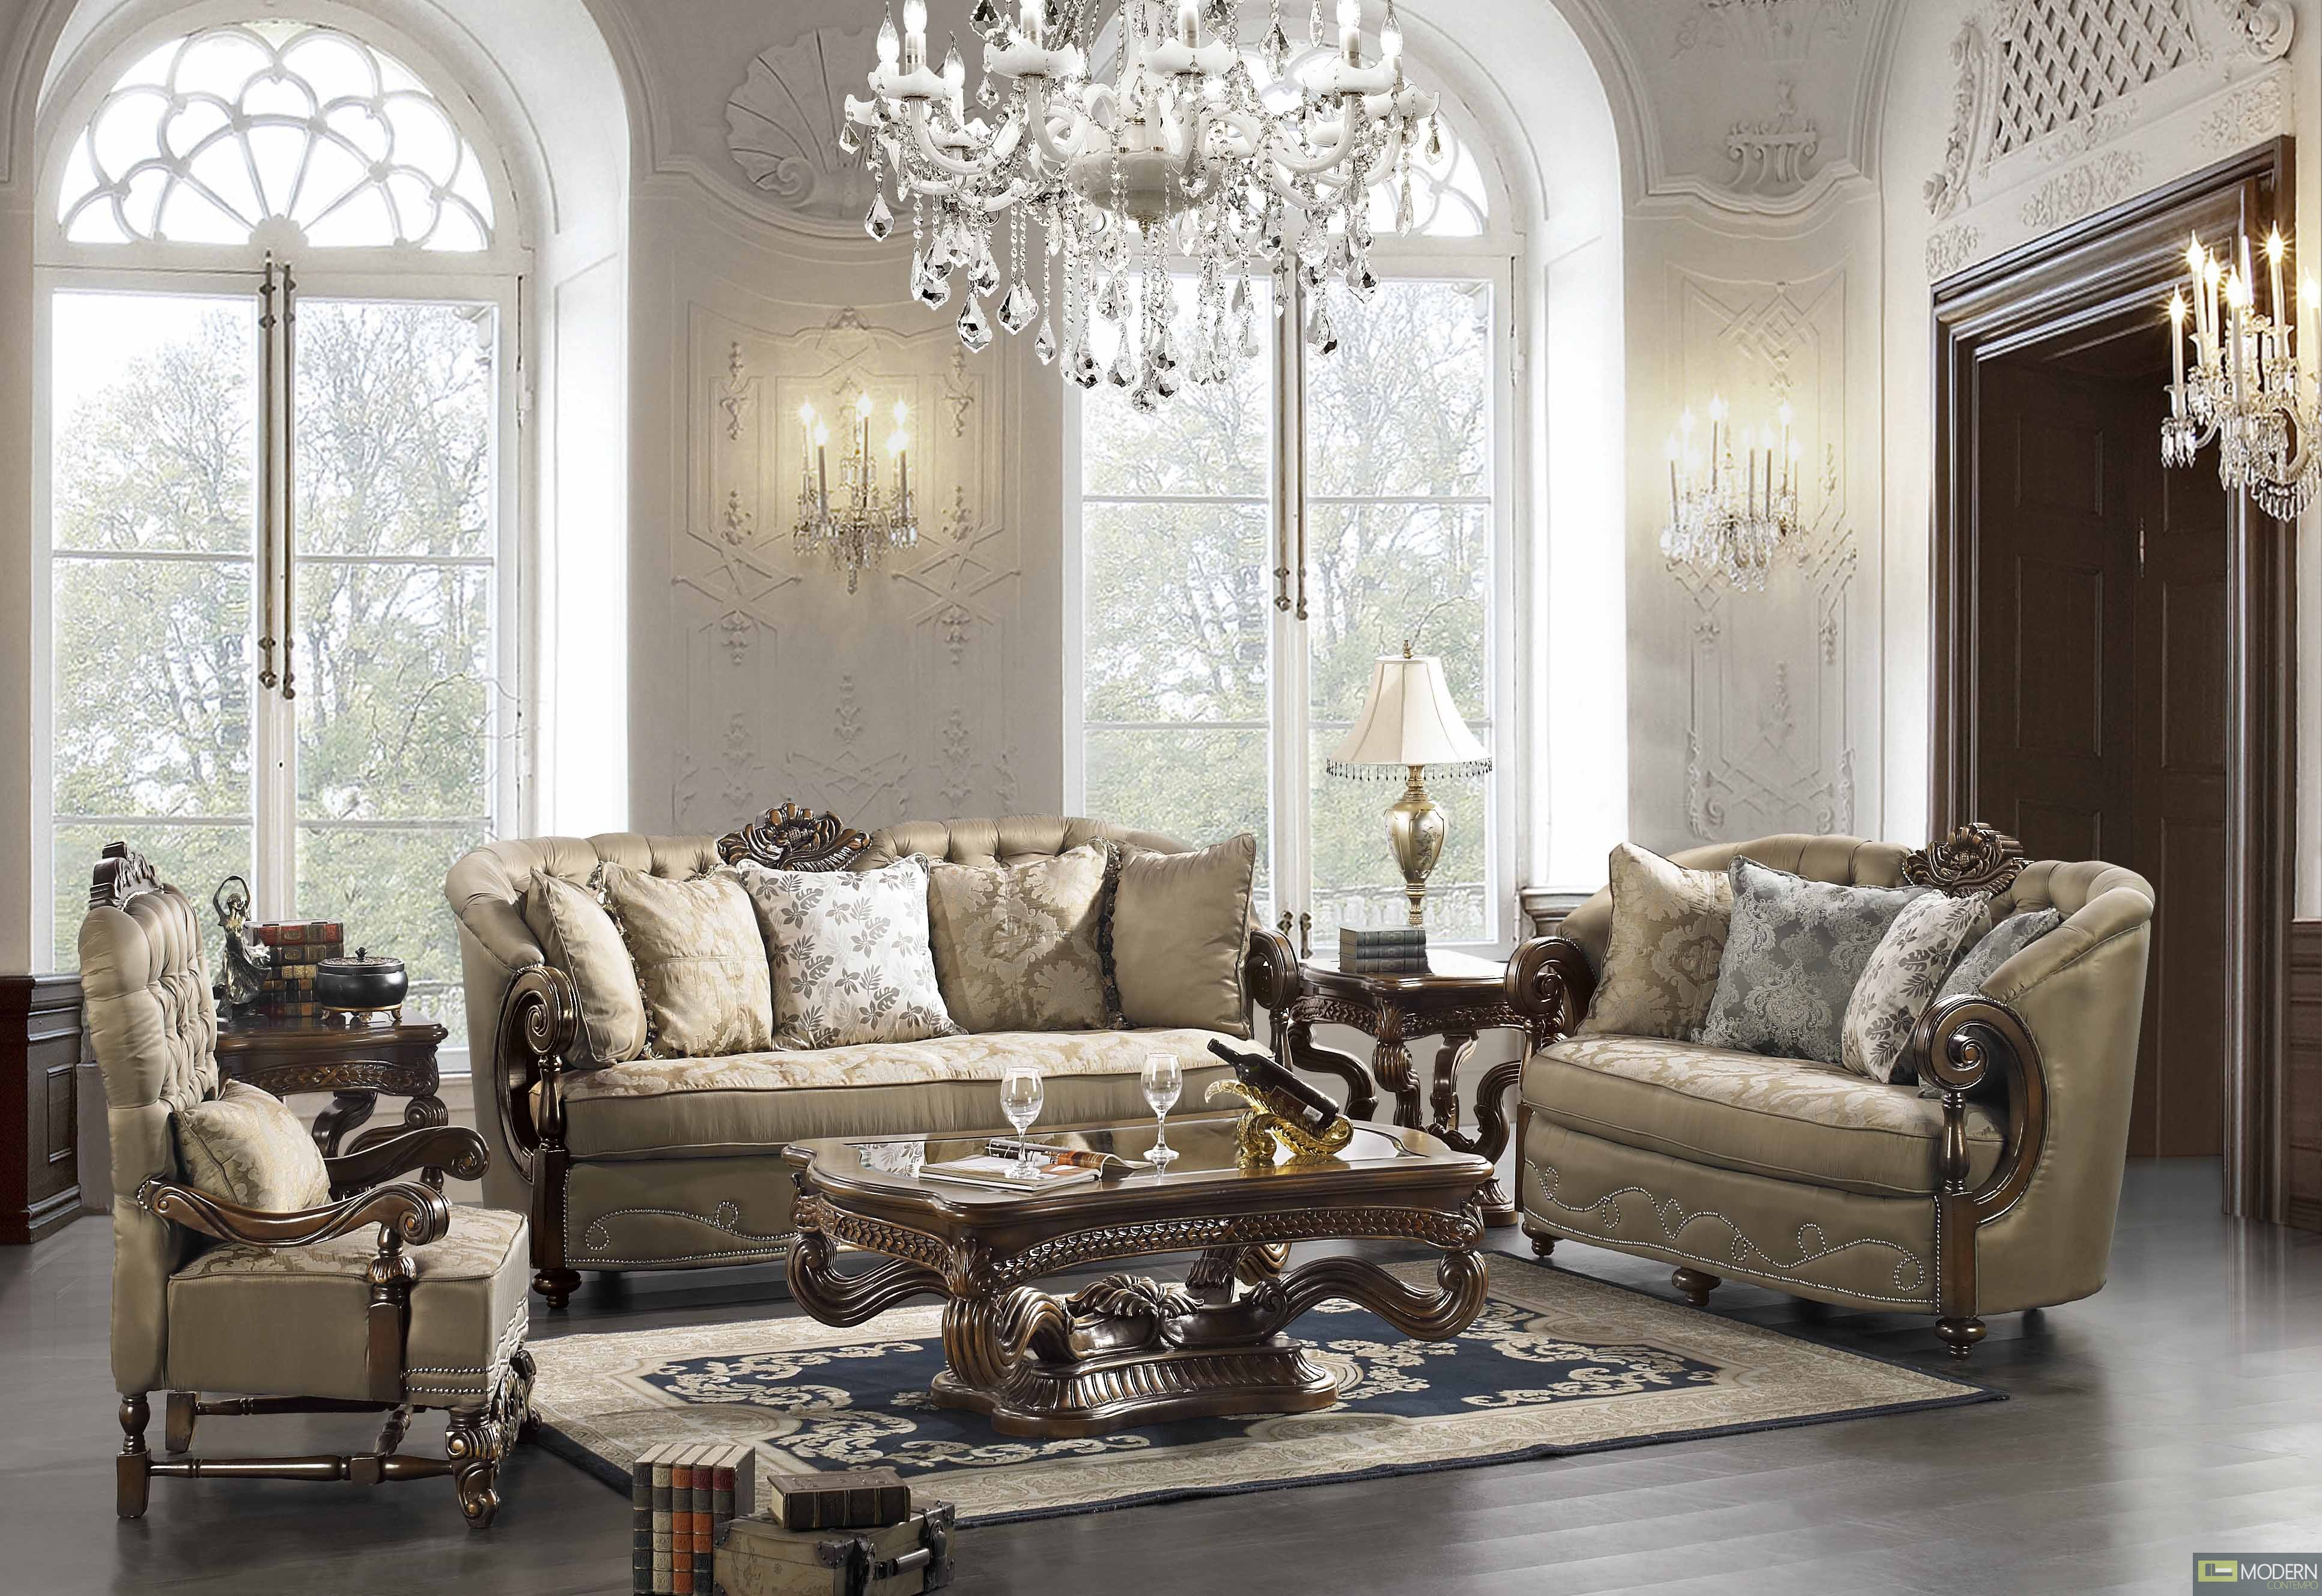 Elegant Home Decor: Bring Luxury Into Your Home